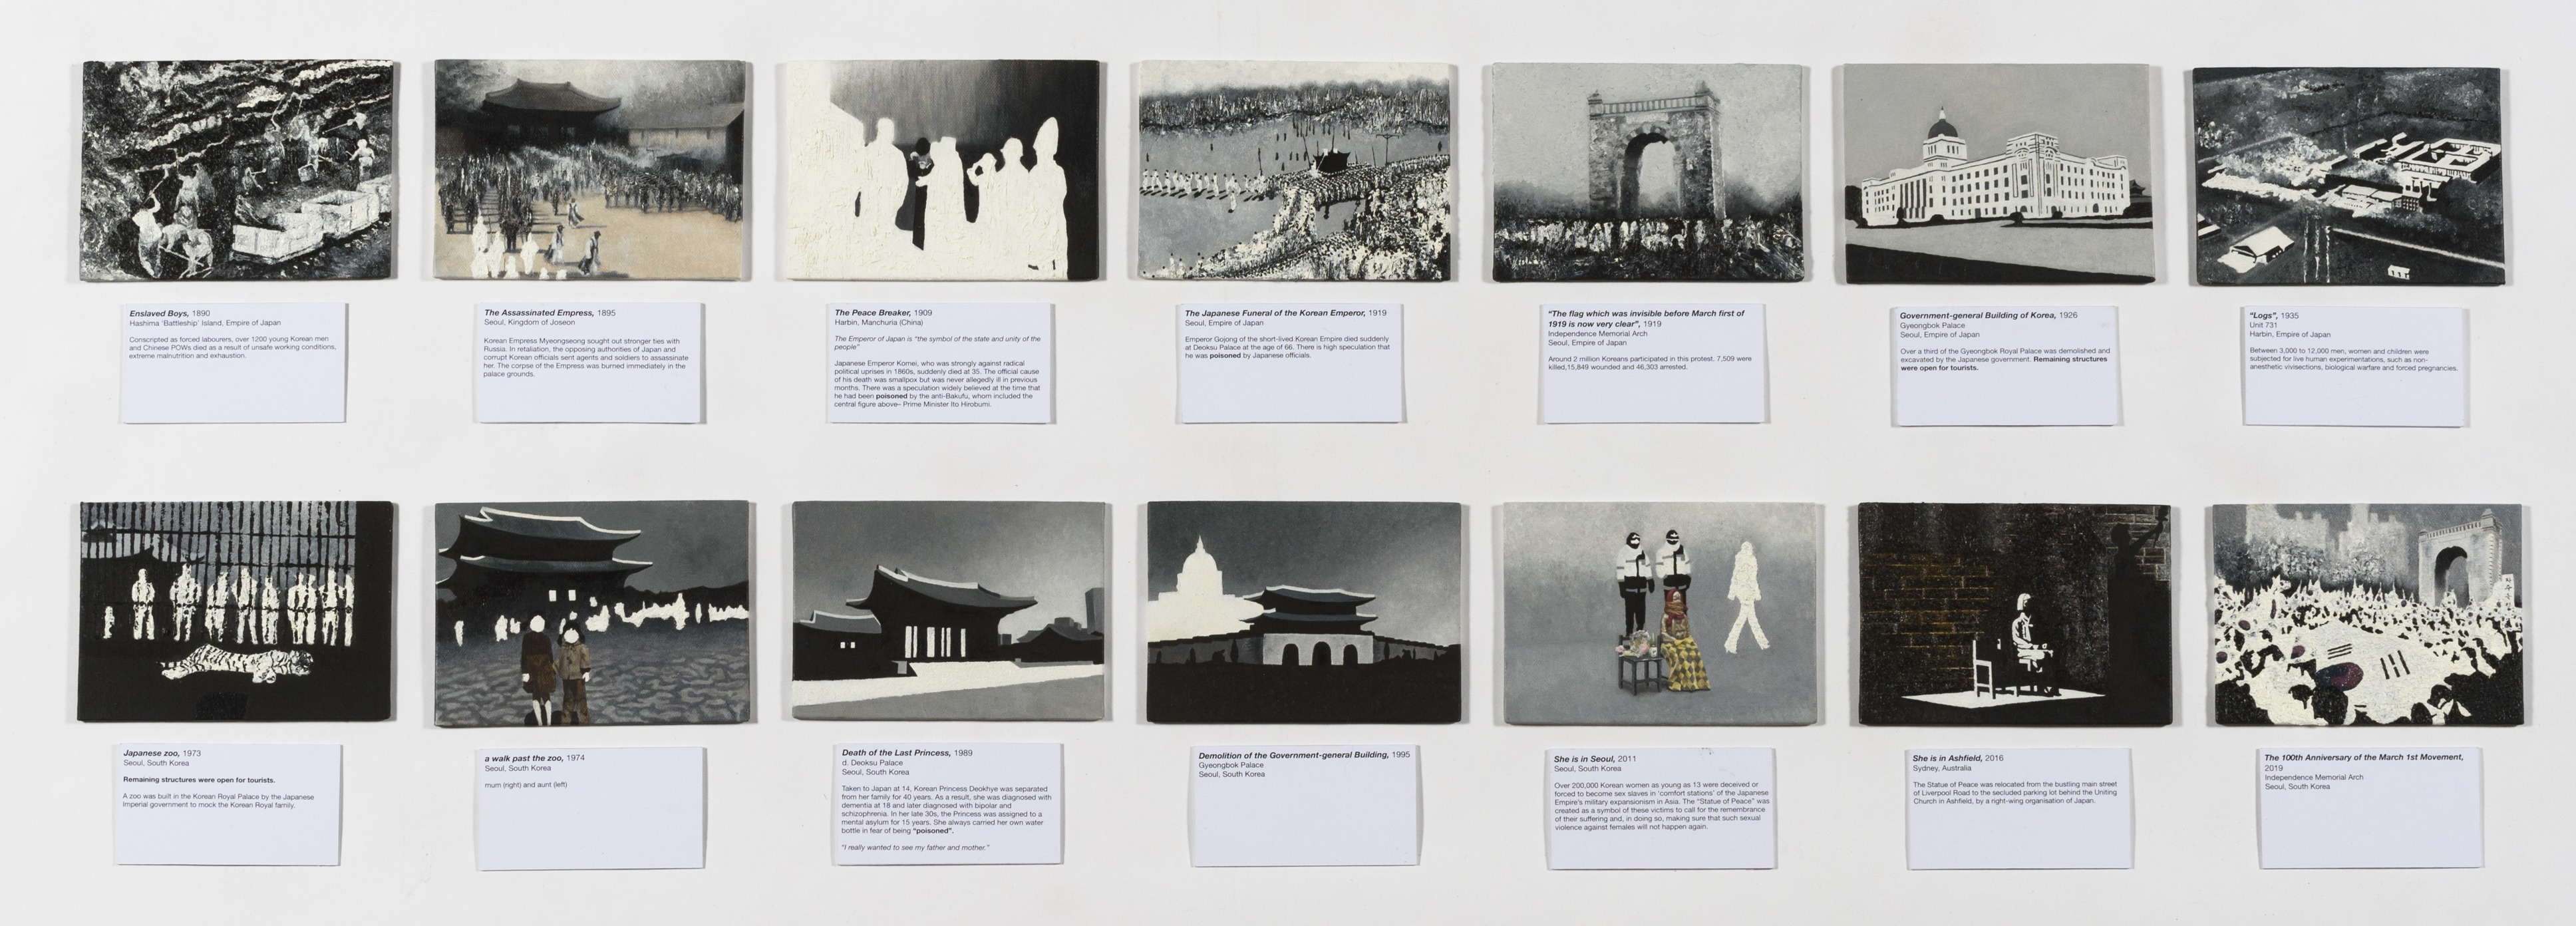 Fourteen small paintings of old photographs of sites in Korea, each painting is accompanied by a text label describing the image.